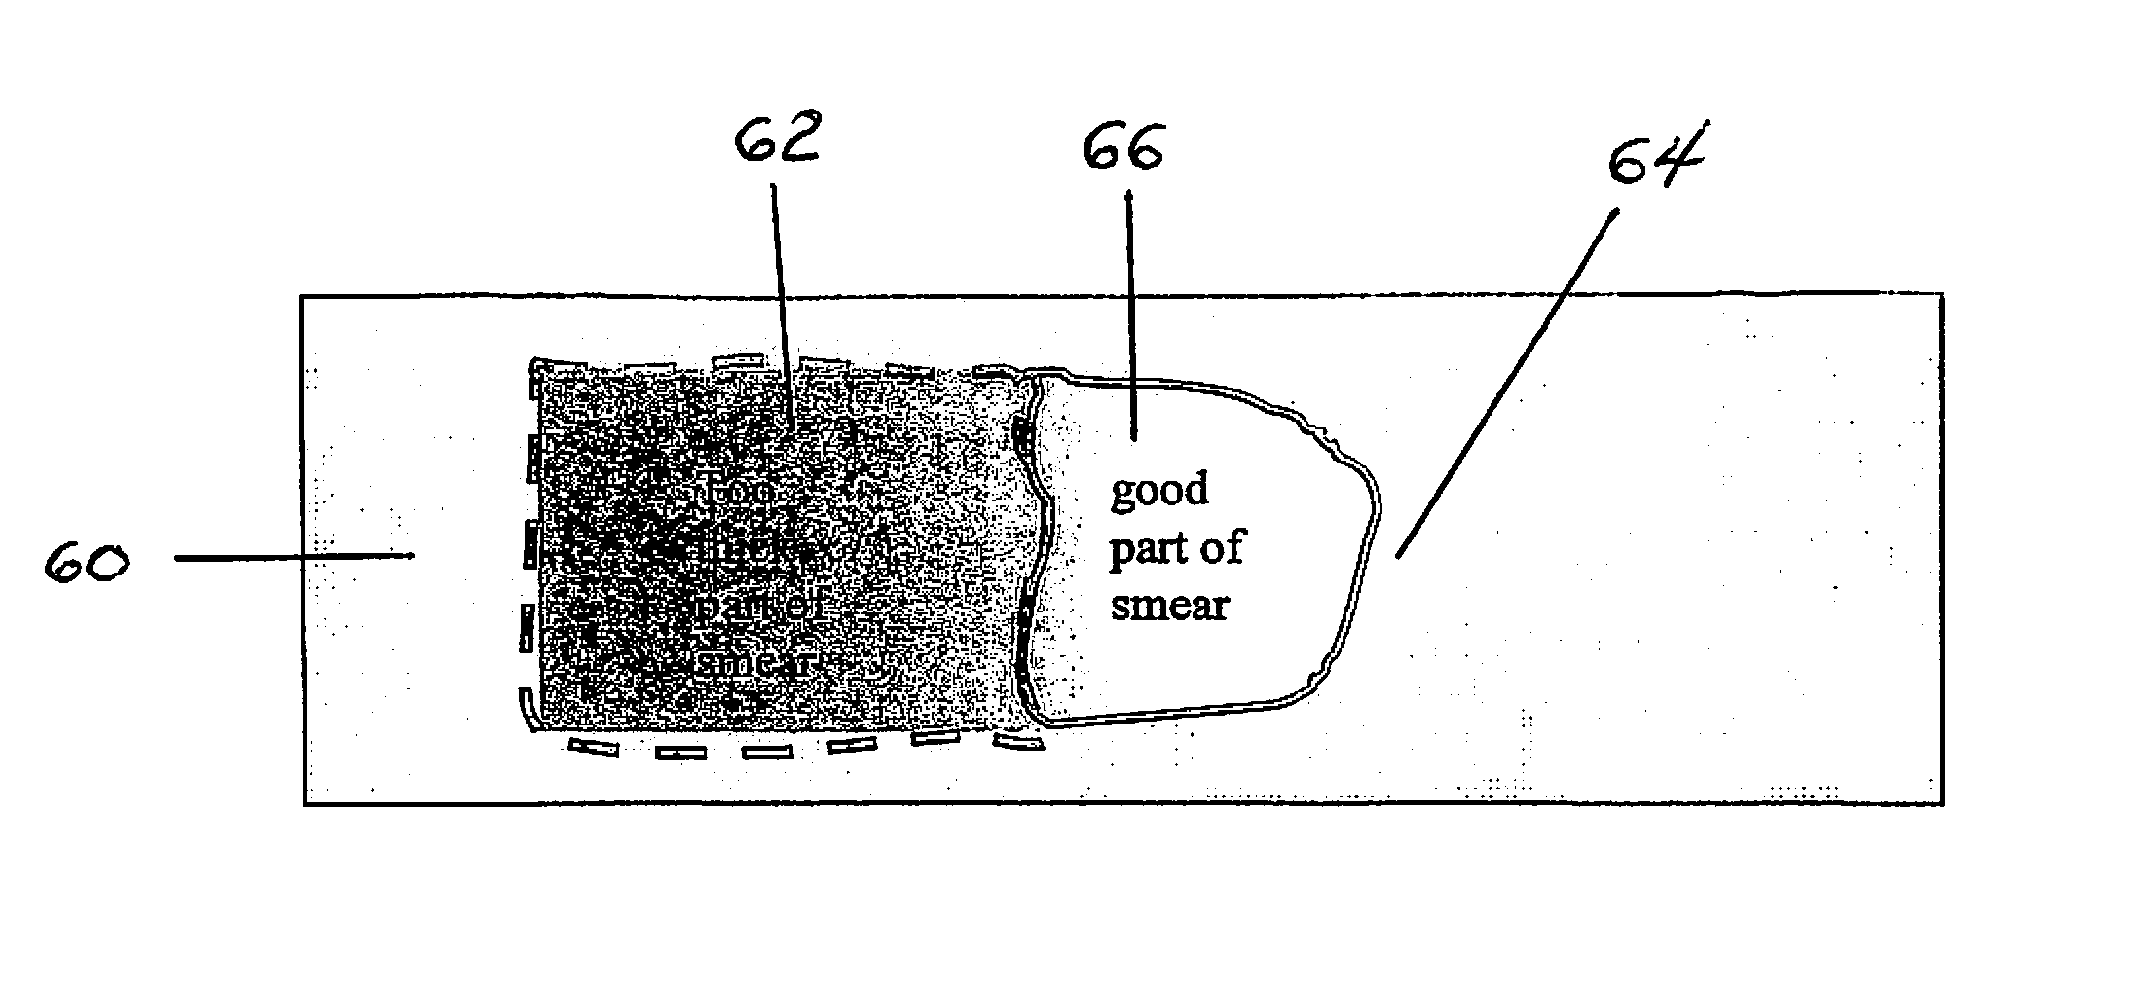 Method for performing a blood count and determining the morphology of a blood smear